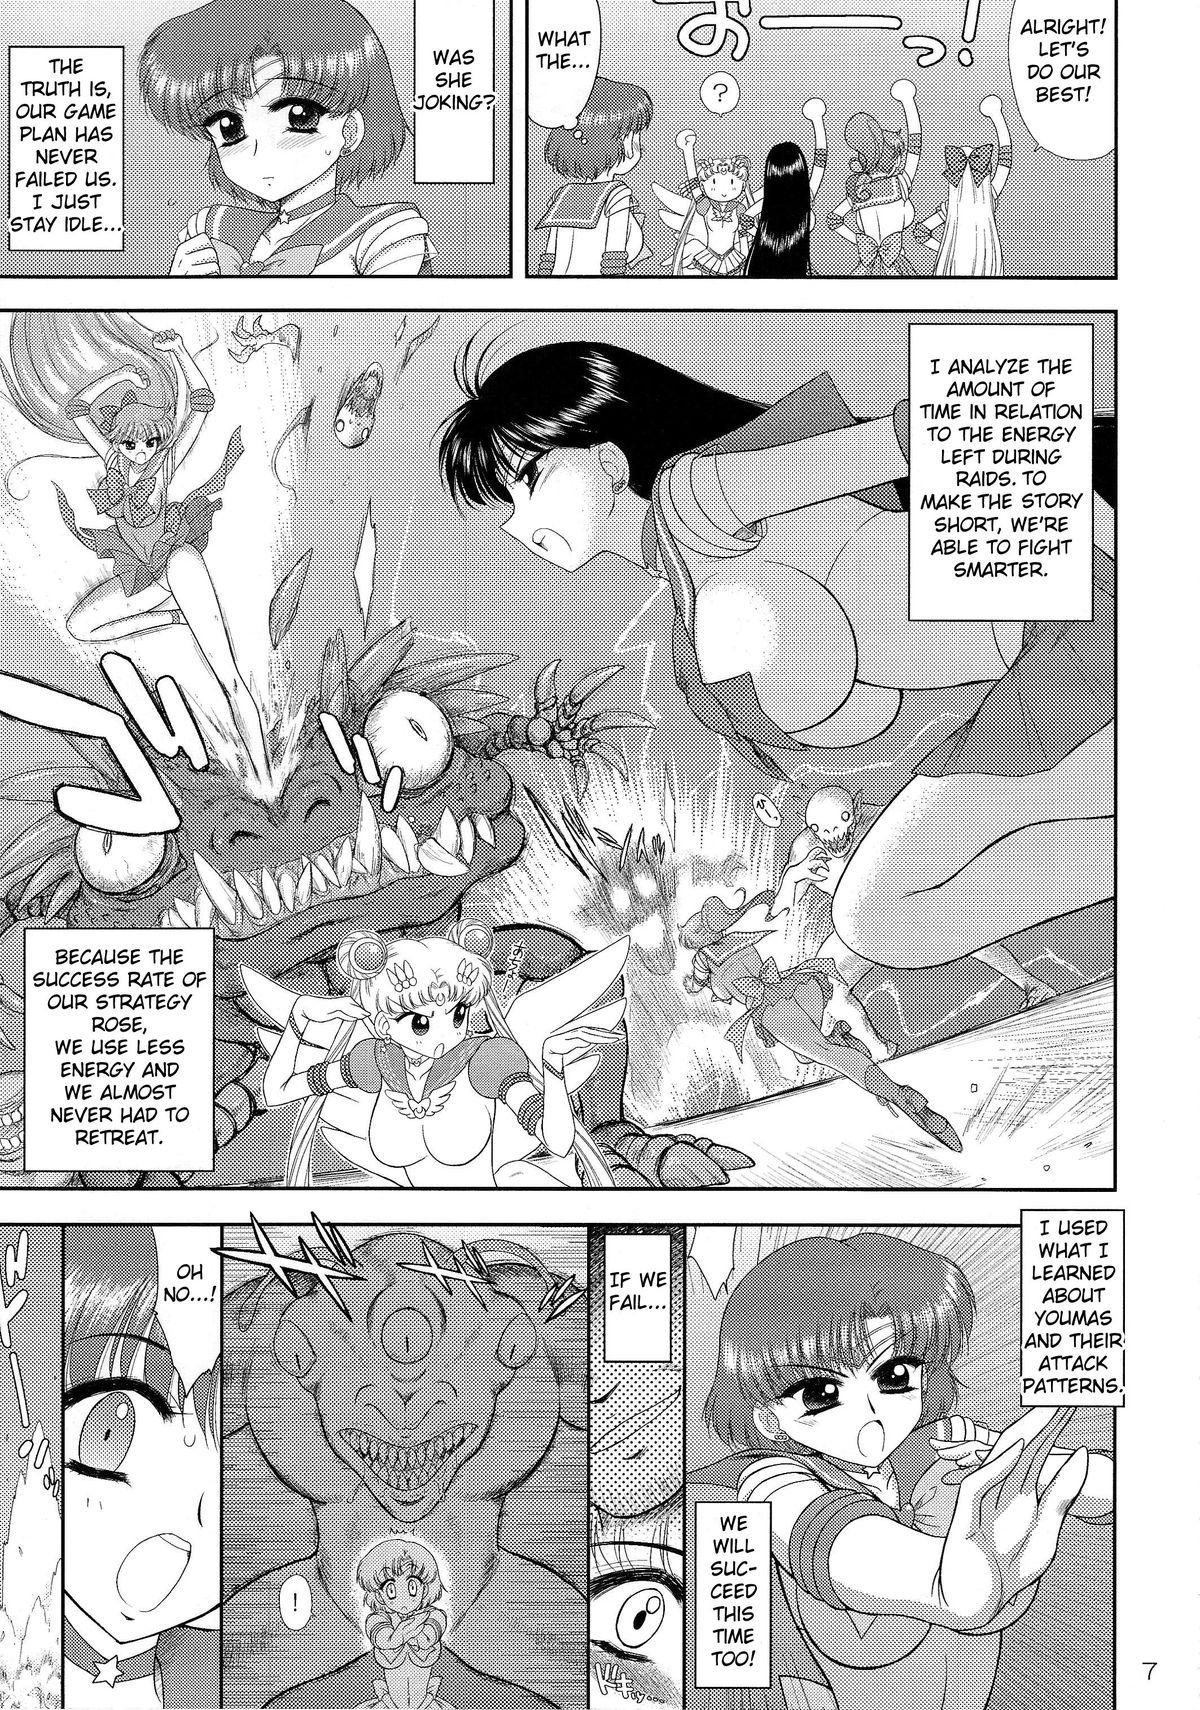 Women Sucking MADE IN HEAVEN - Sailor moon Moaning - Page 6